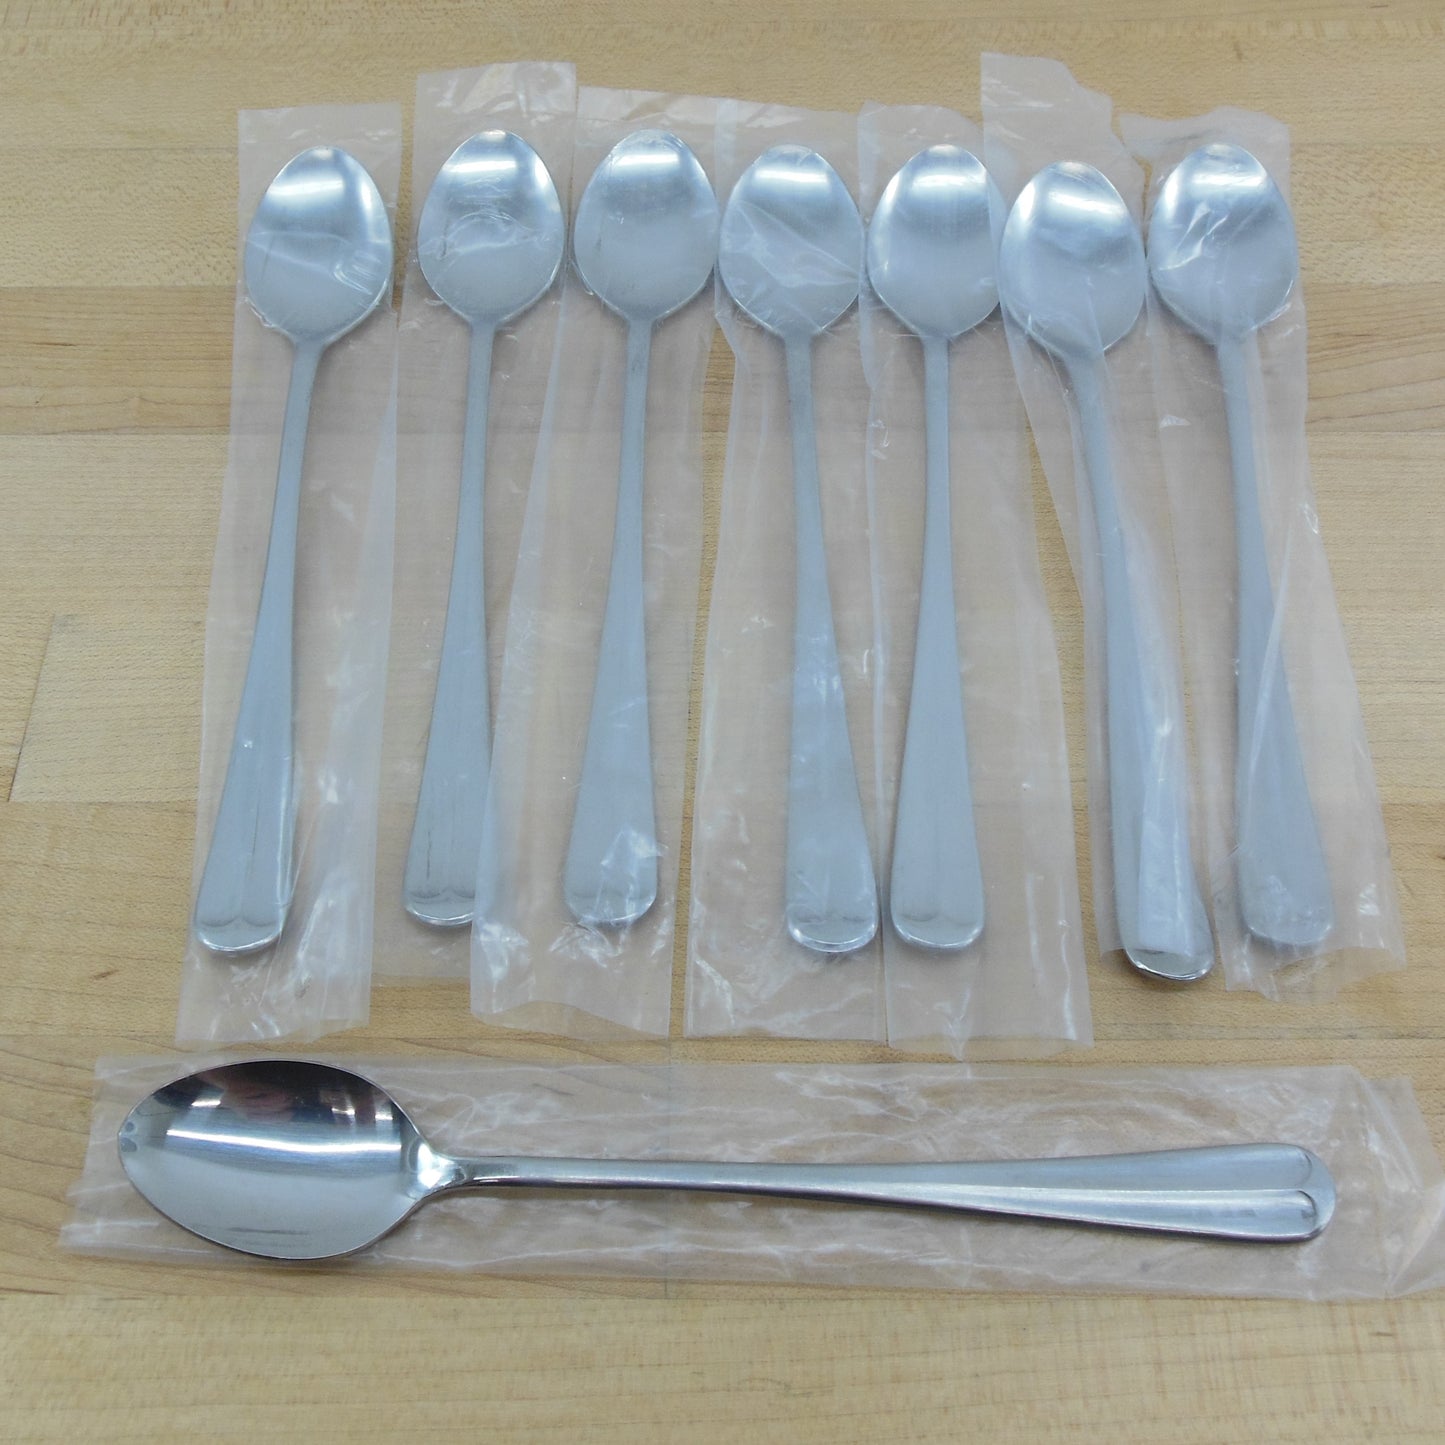 Barclay Geneve Korea Oyster Bay Stainless Flatware NOS - 8 Set Iced Tea Spoons